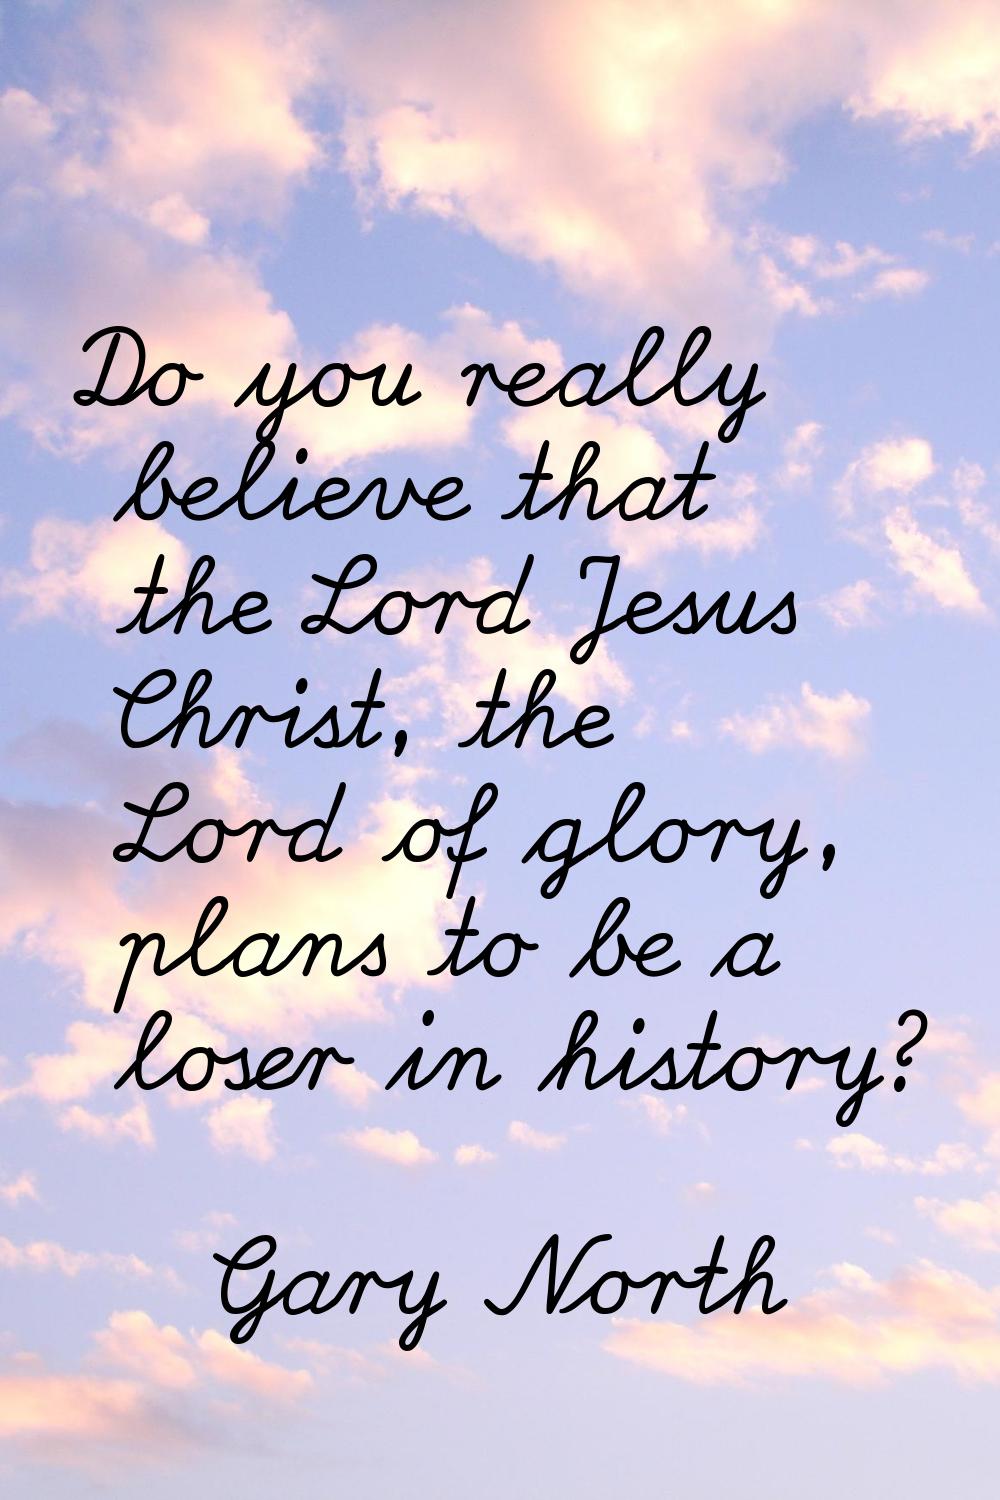 Do you really believe that the Lord Jesus Christ, the Lord of glory, plans to be a loser in history